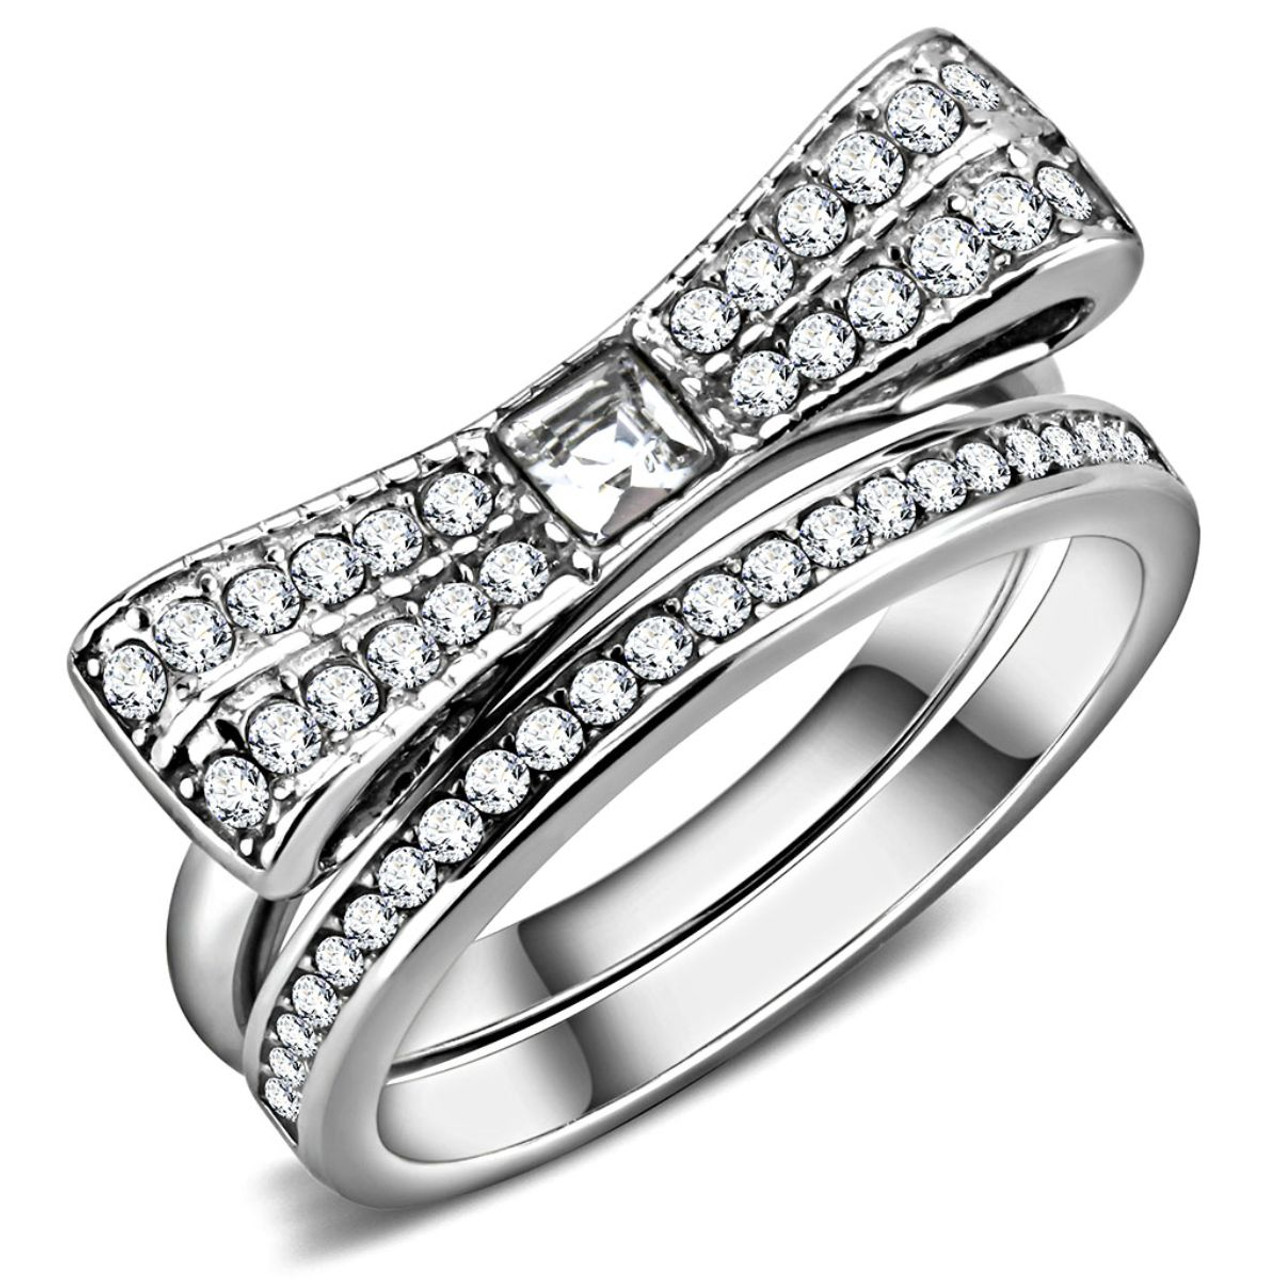 Set of 2 Women's Stainless Steel Knot & Bow Wedding Rings with CZ Stones, Size  10